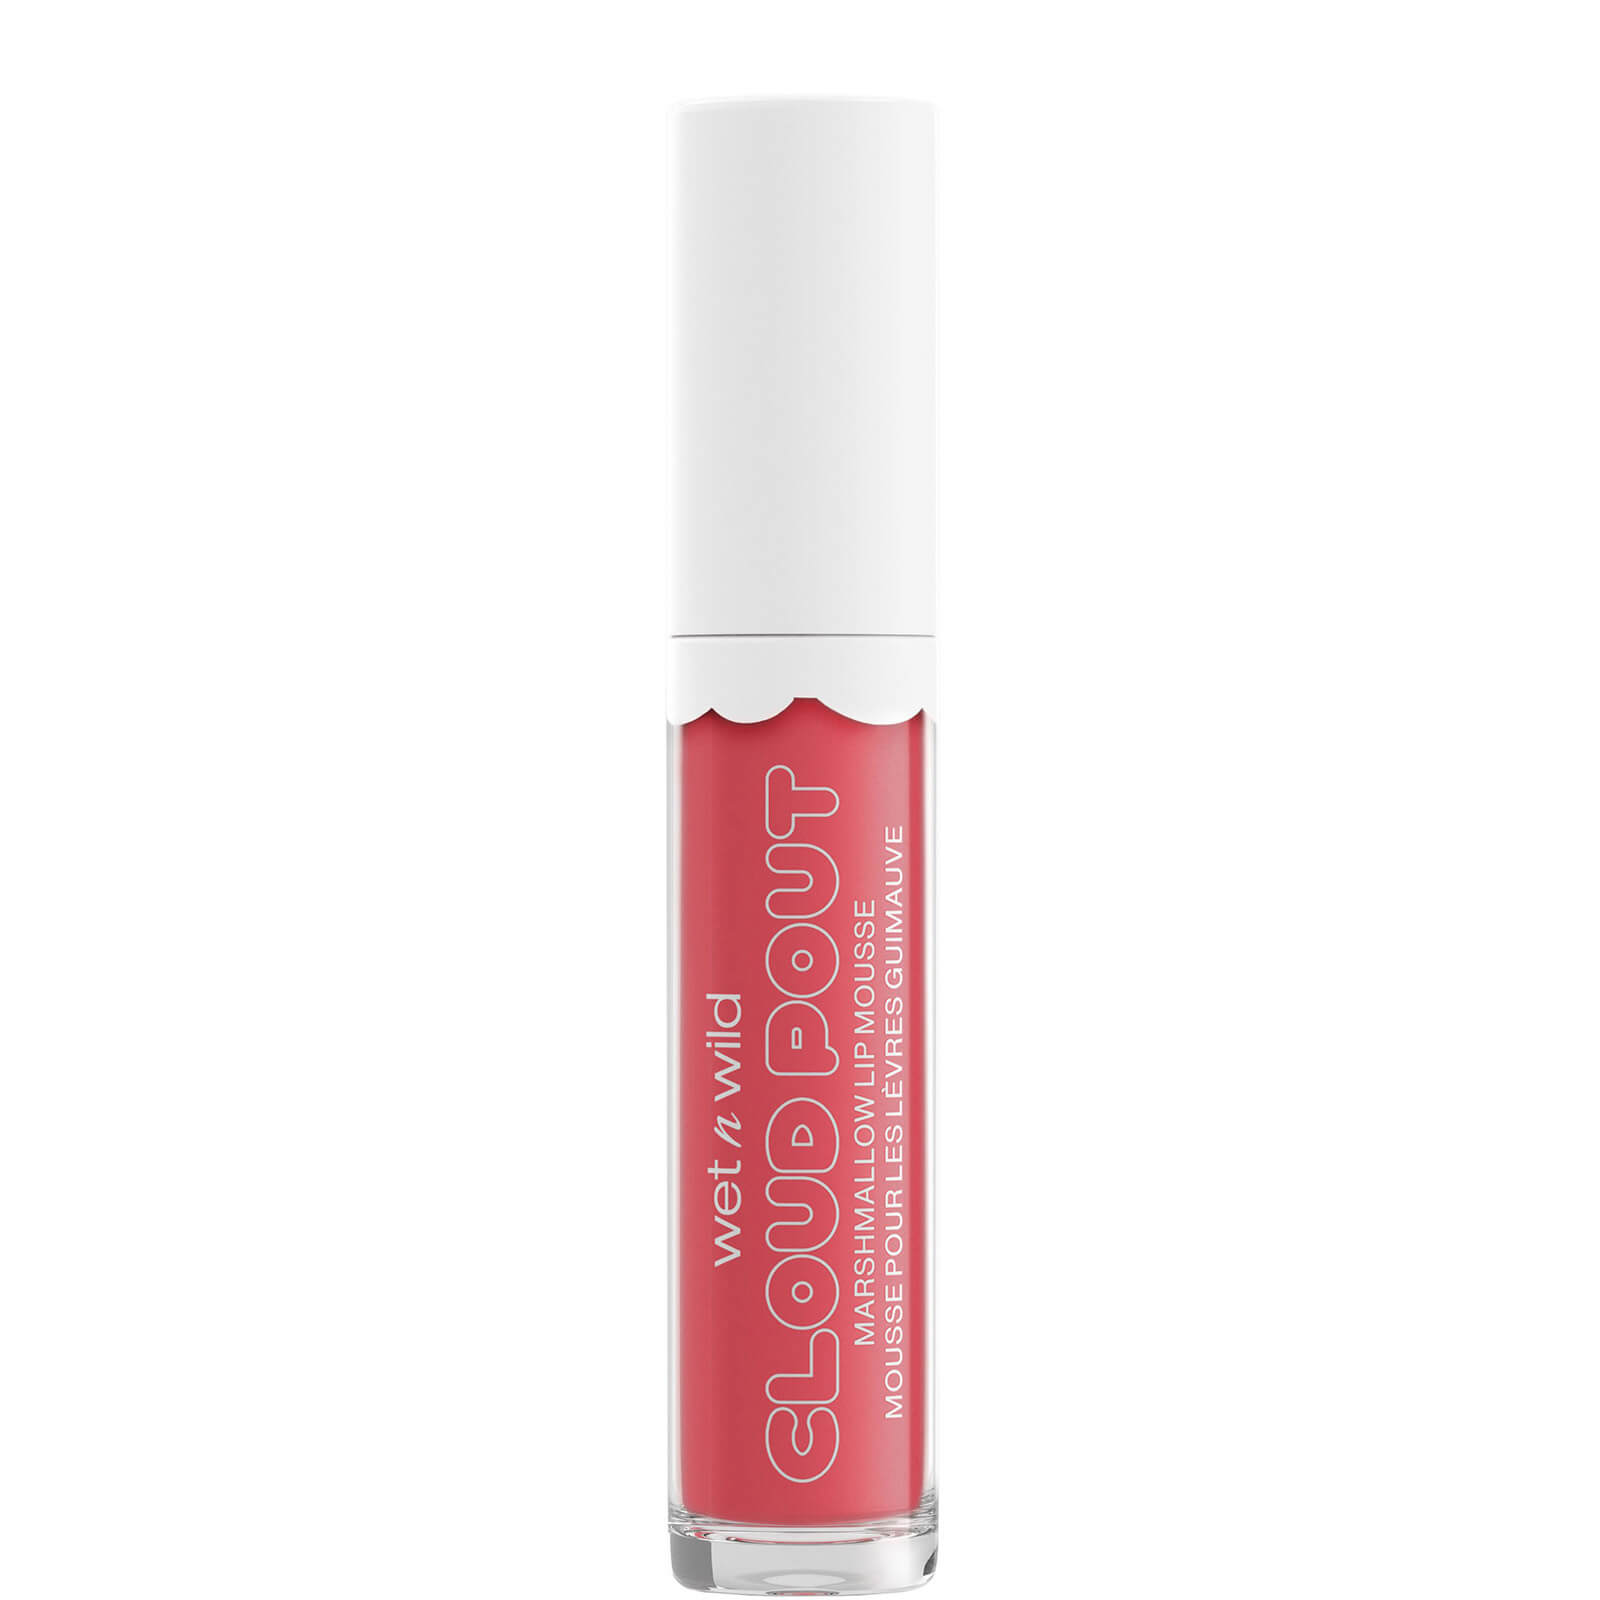 wet n wild Cloud Pout Marshmellow Lip Mousse 3ml (Various Shades) - Marshmallow Madness